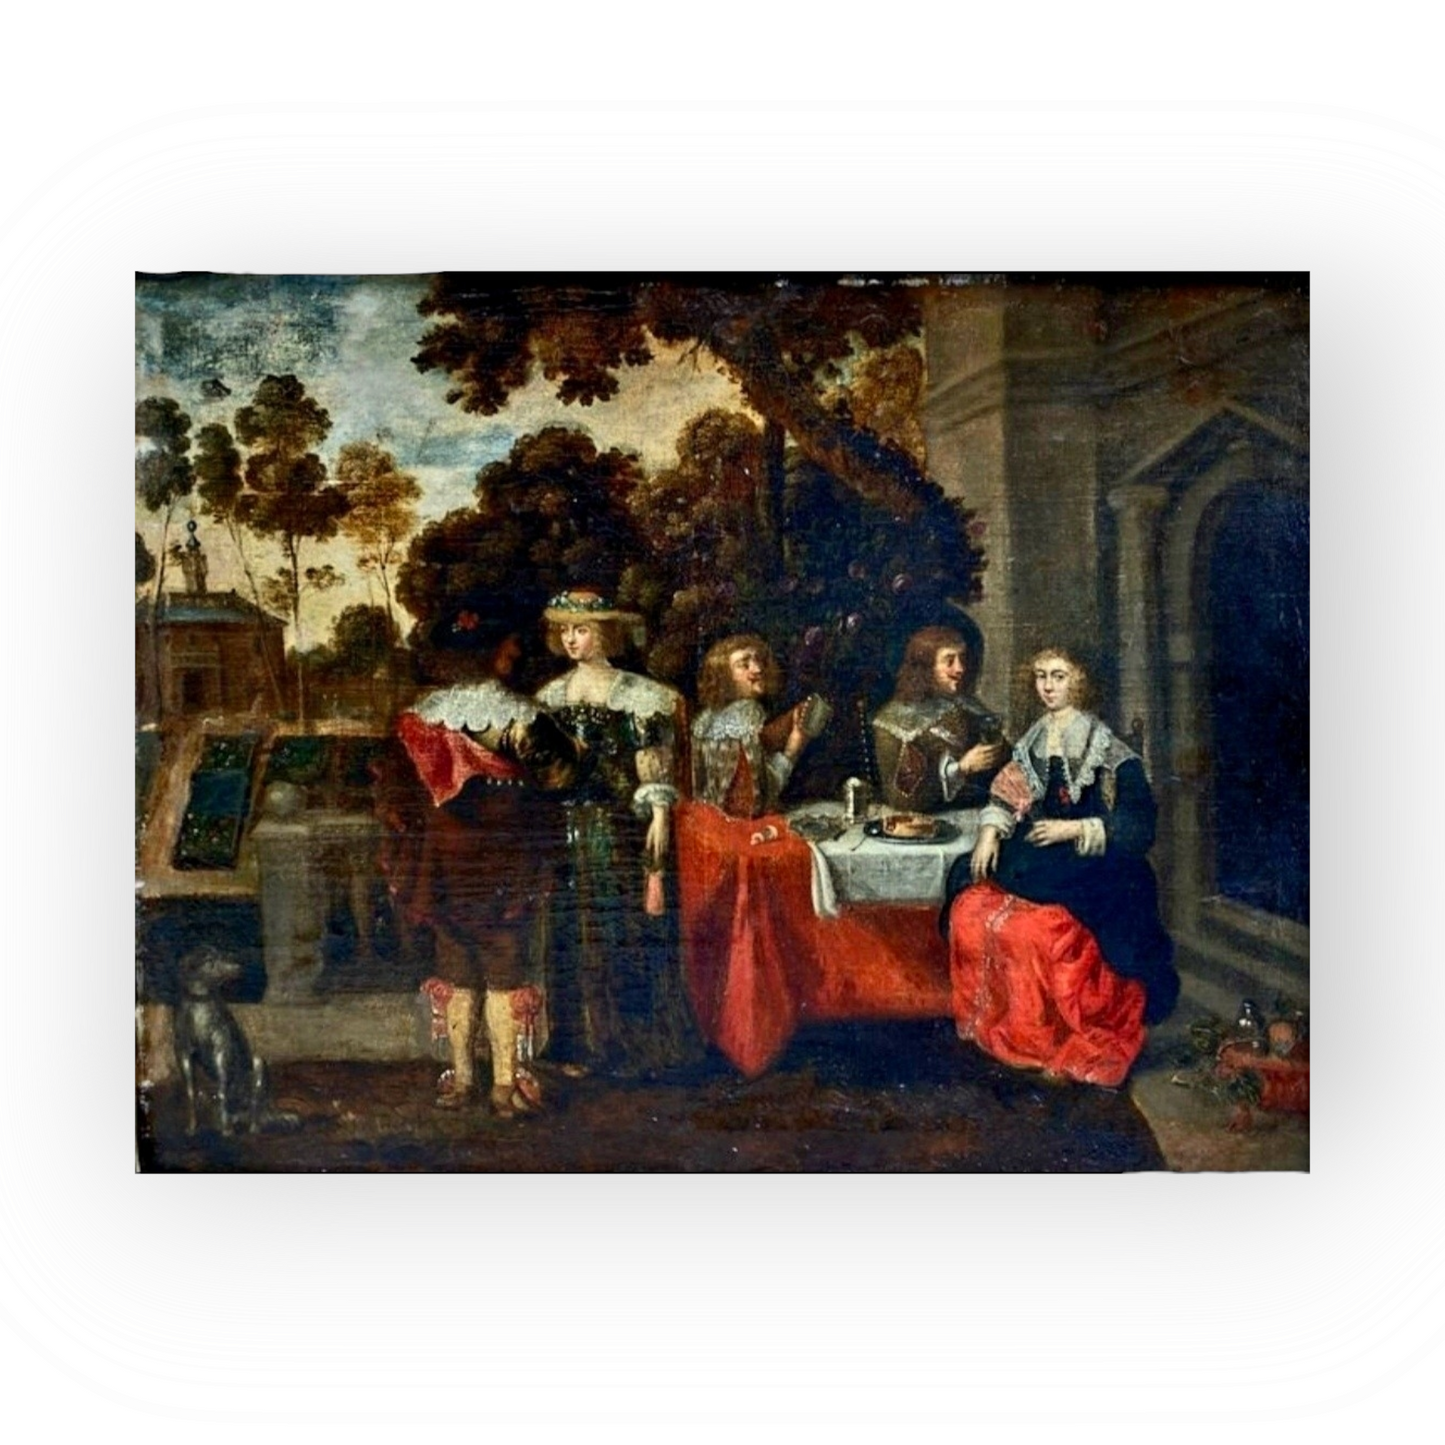 A mid-17th Century Flemish antique oil on canvas depicting courtiers banqueting.